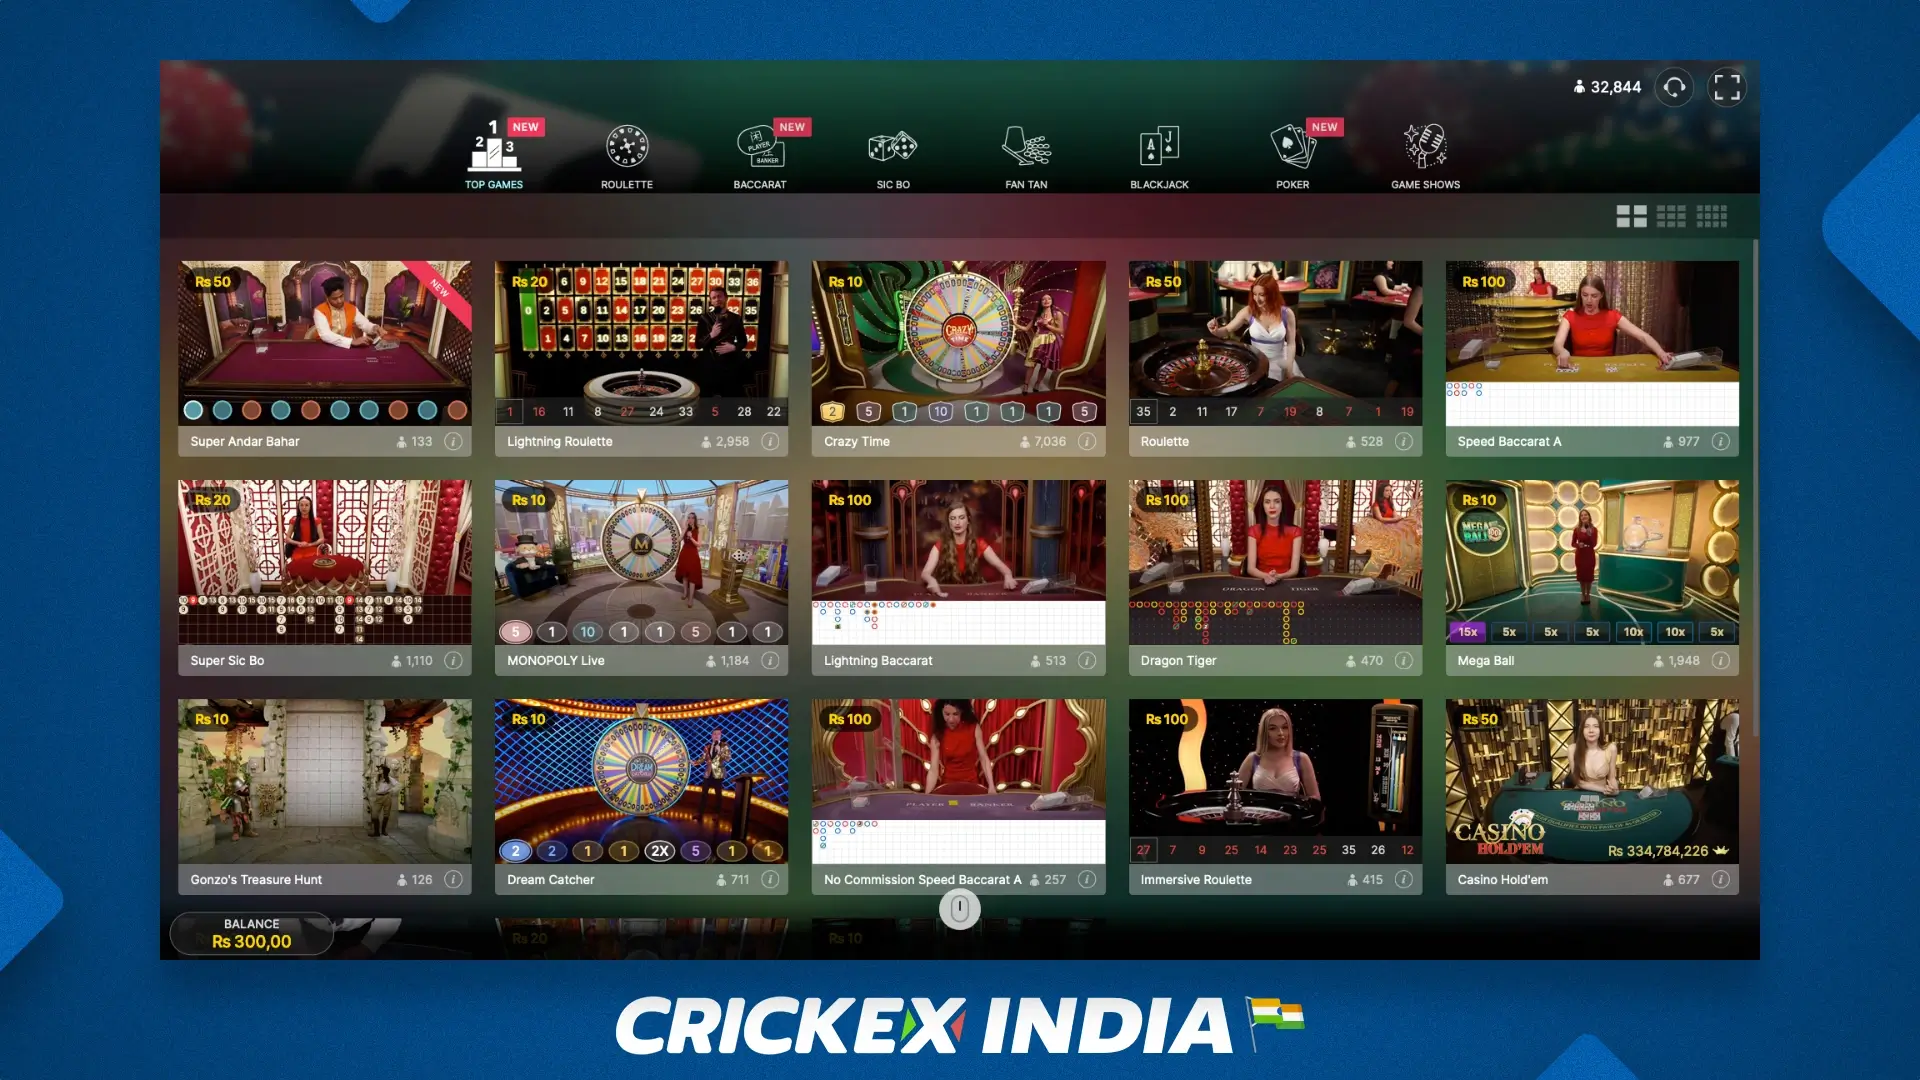 The most popular games at Crickex online casinos